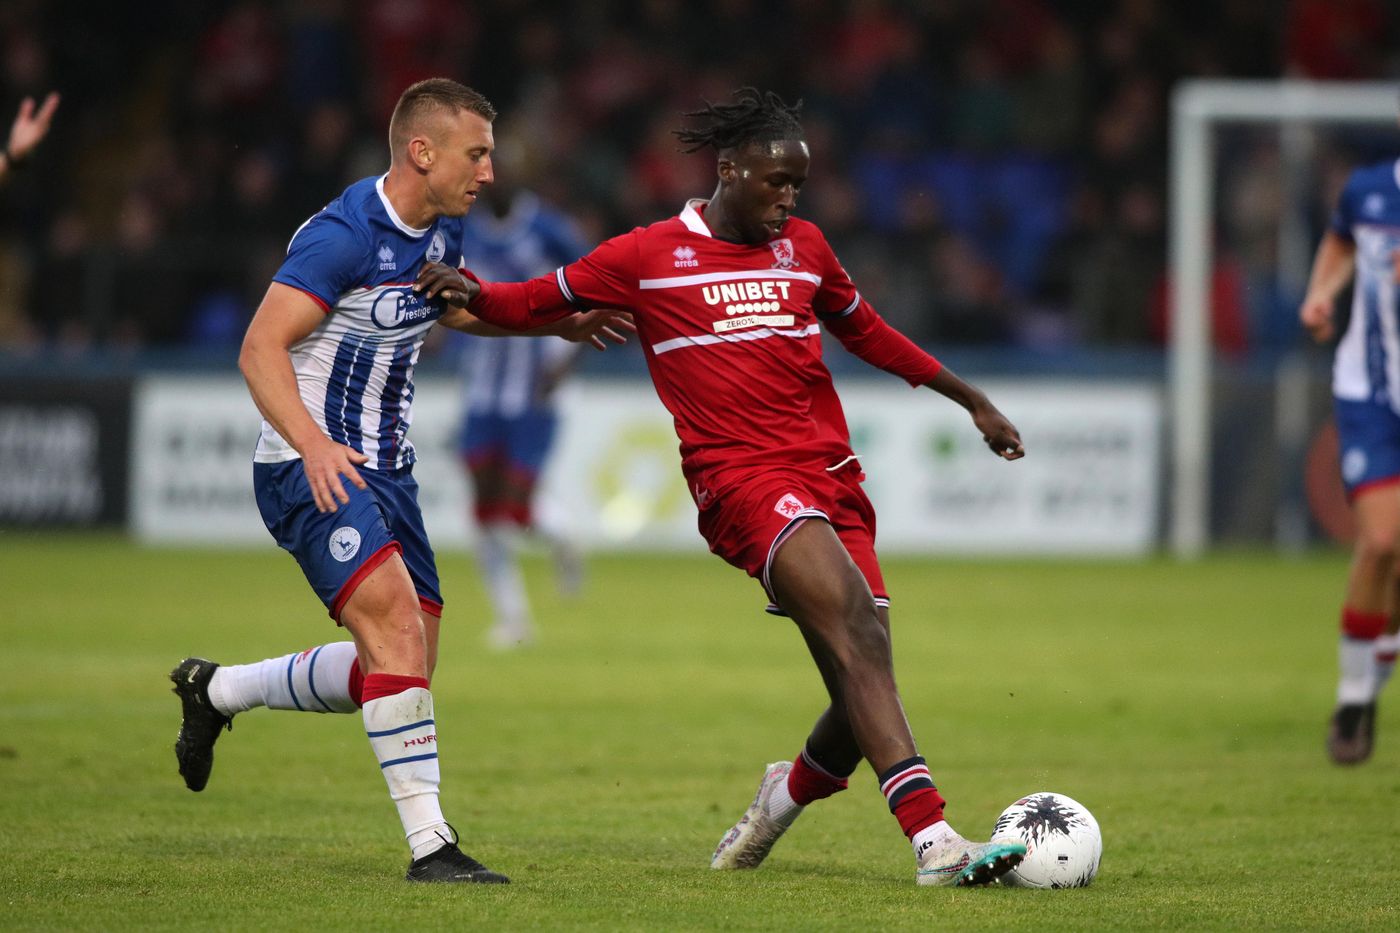 Highlights: Hartlepool 2-0 Middlesbrough in Club Friendly 2023